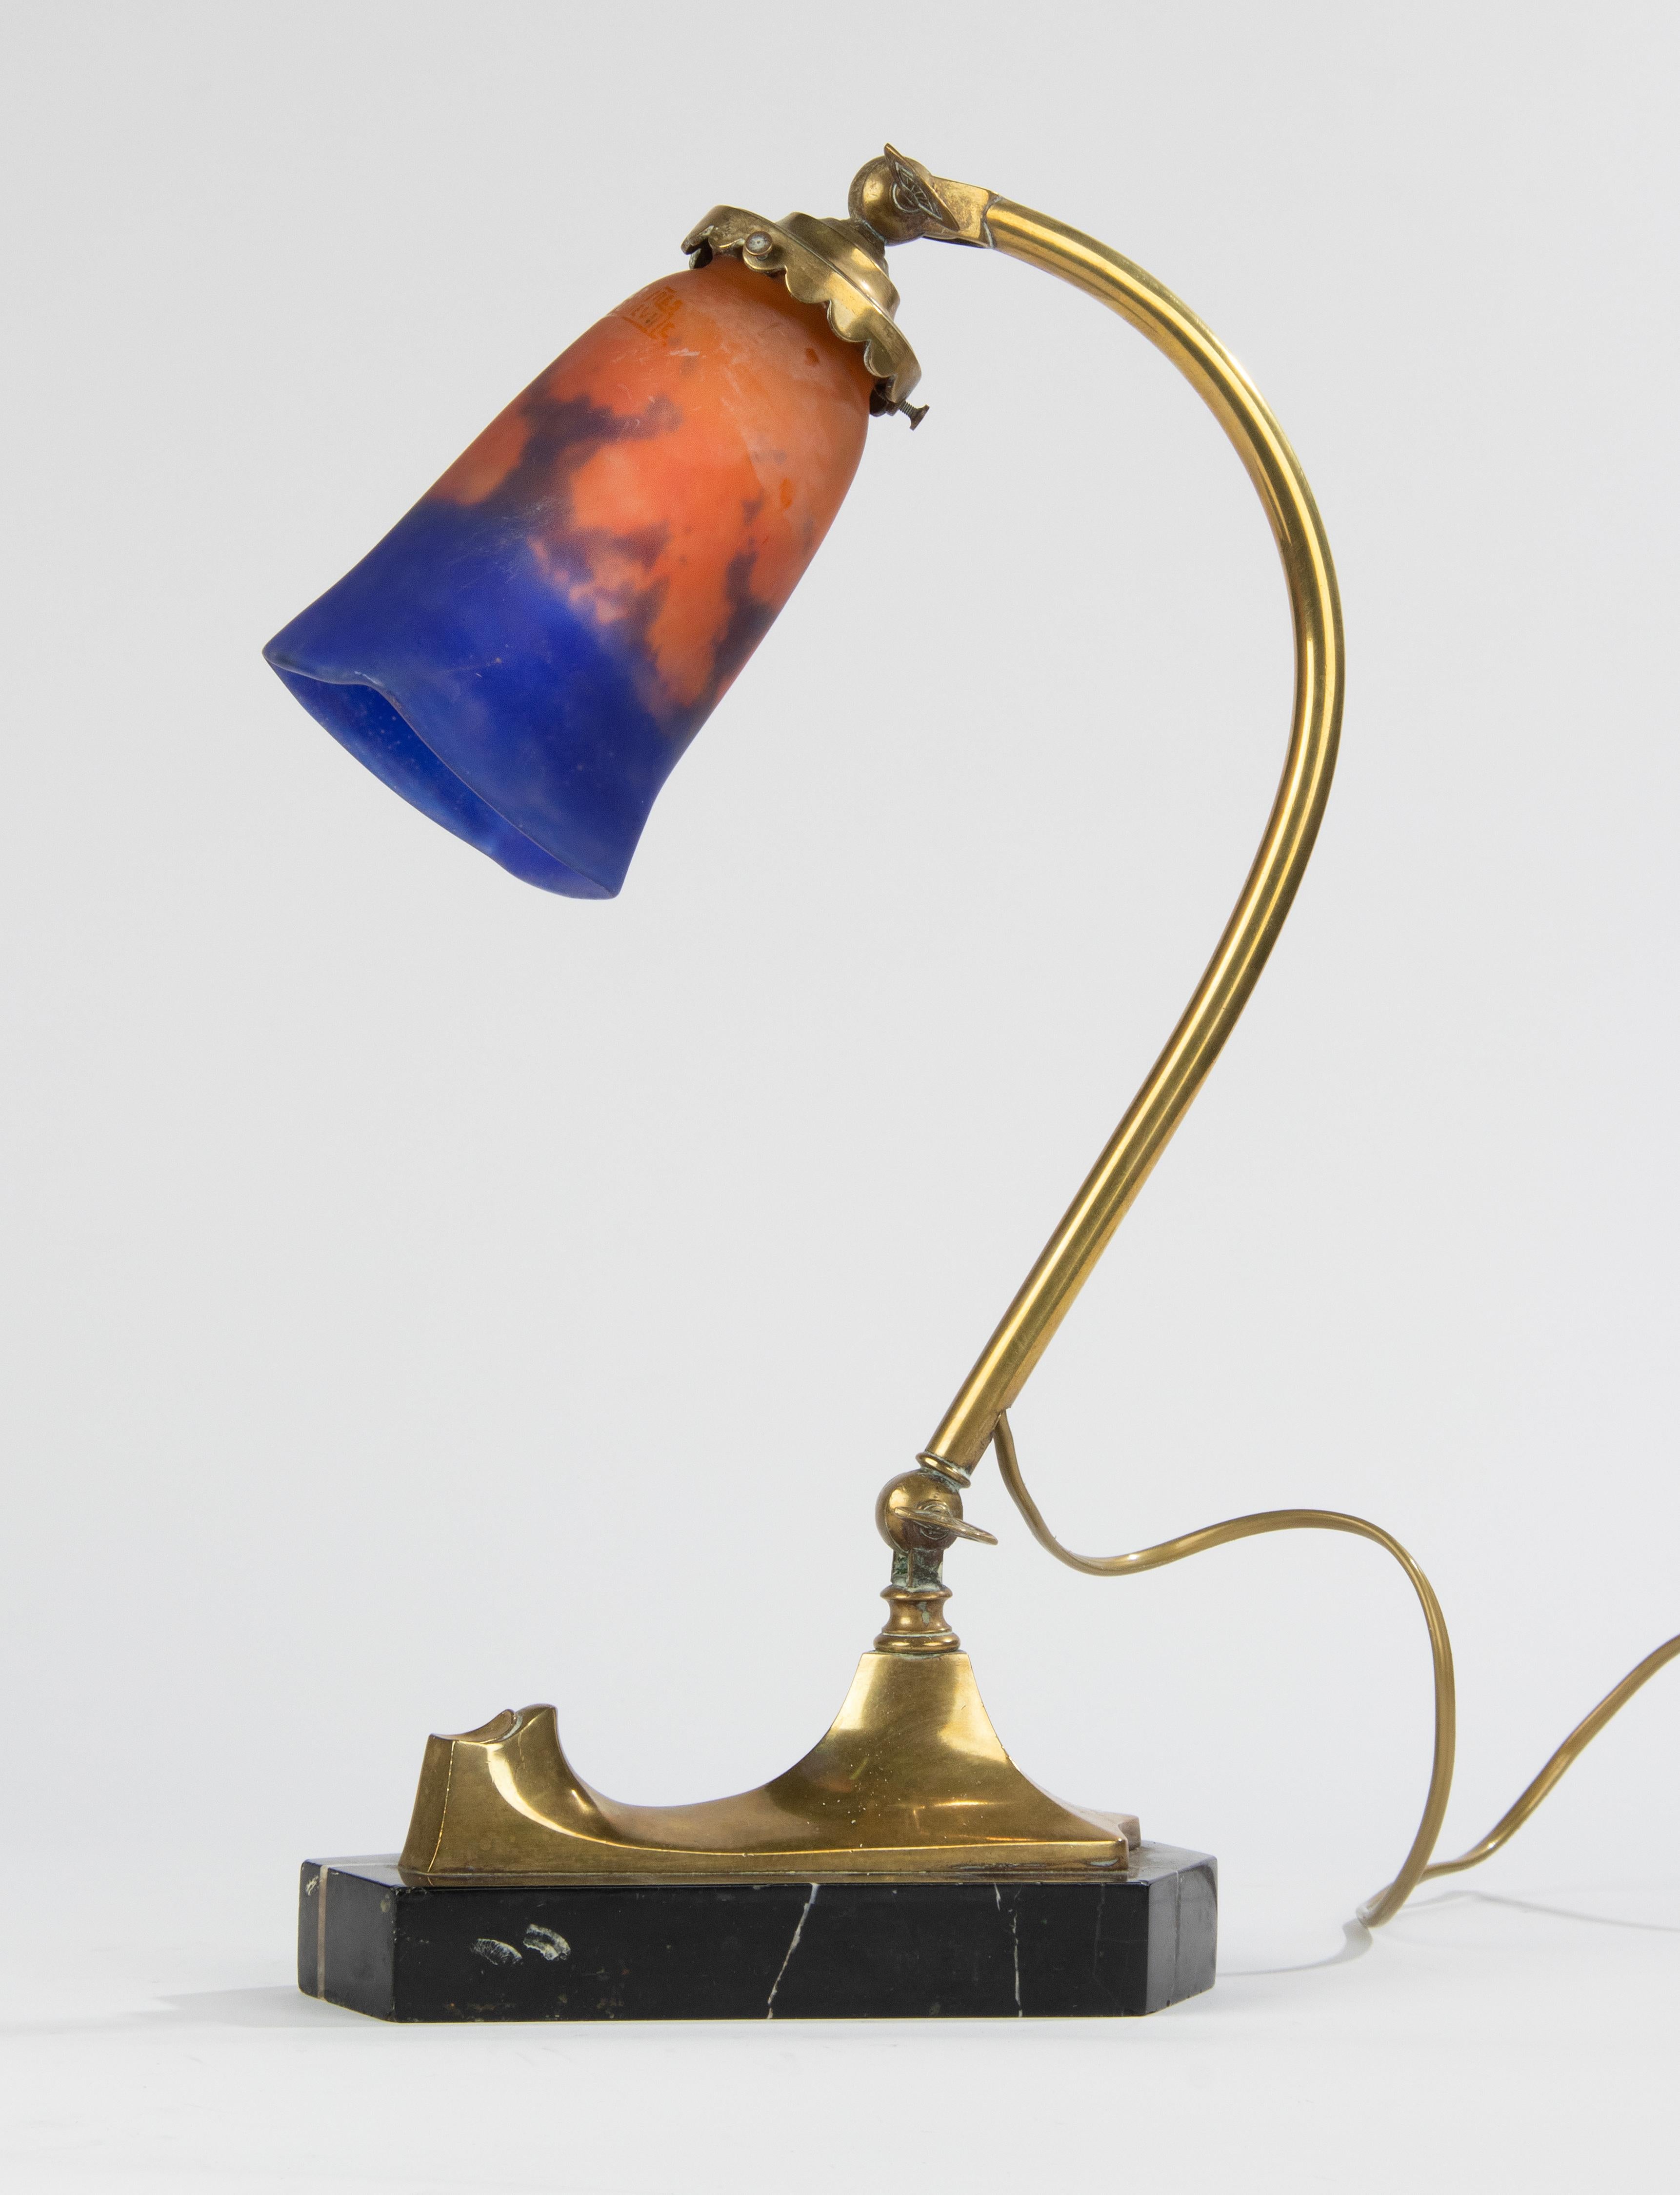 Early 20th Century Art Nouveau Brass Desk Table Lamp, Muller Freres Paste Glass In Good Condition For Sale In Casteren, Noord-Brabant